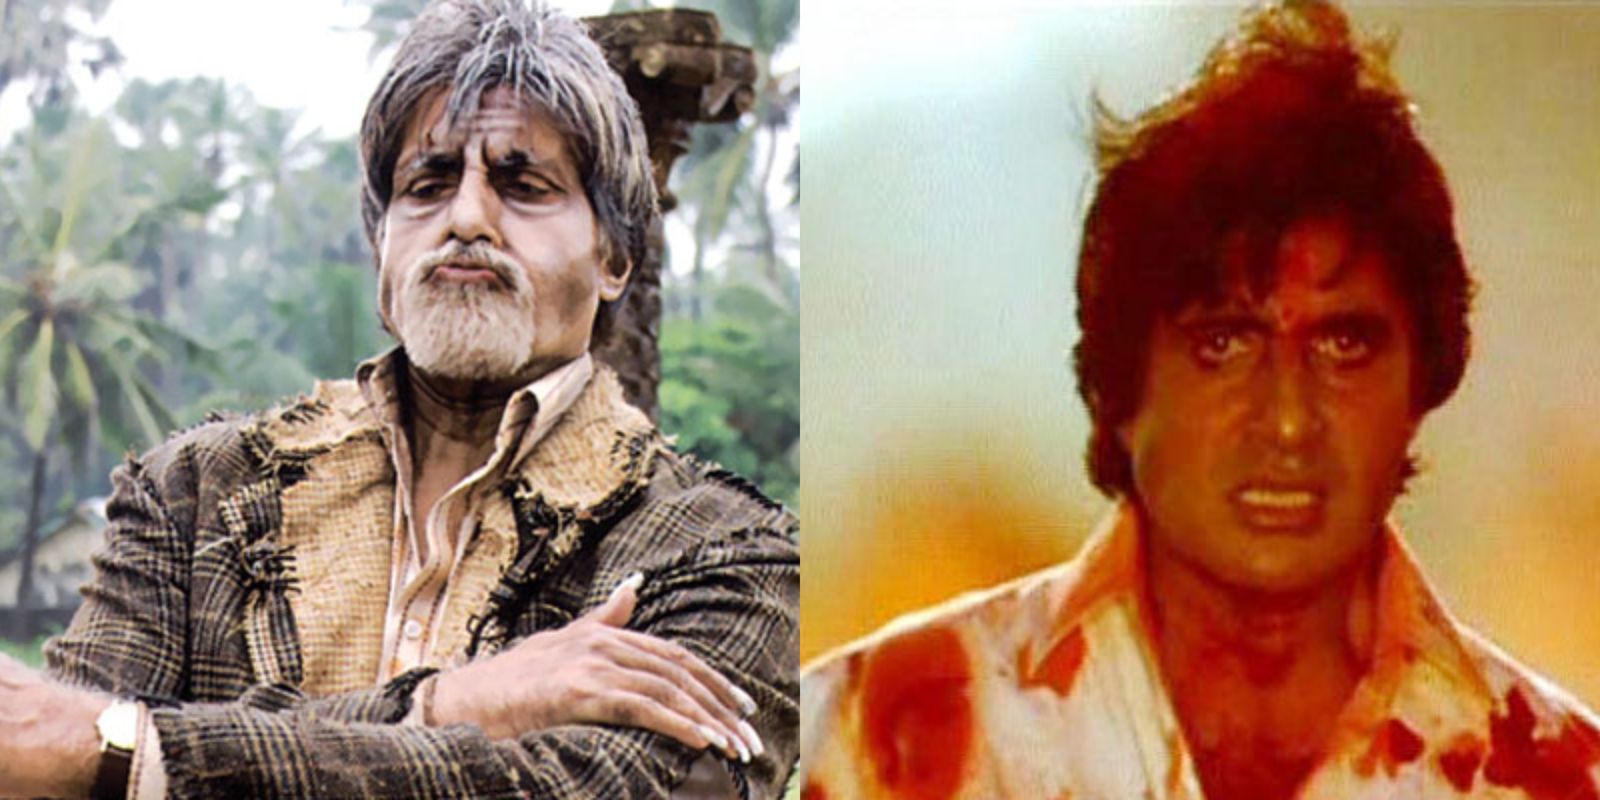 Amitabh Bachchan Reveals His Film Bhootnath Has A Connection To The Very First Shot He Gave For Agneepath